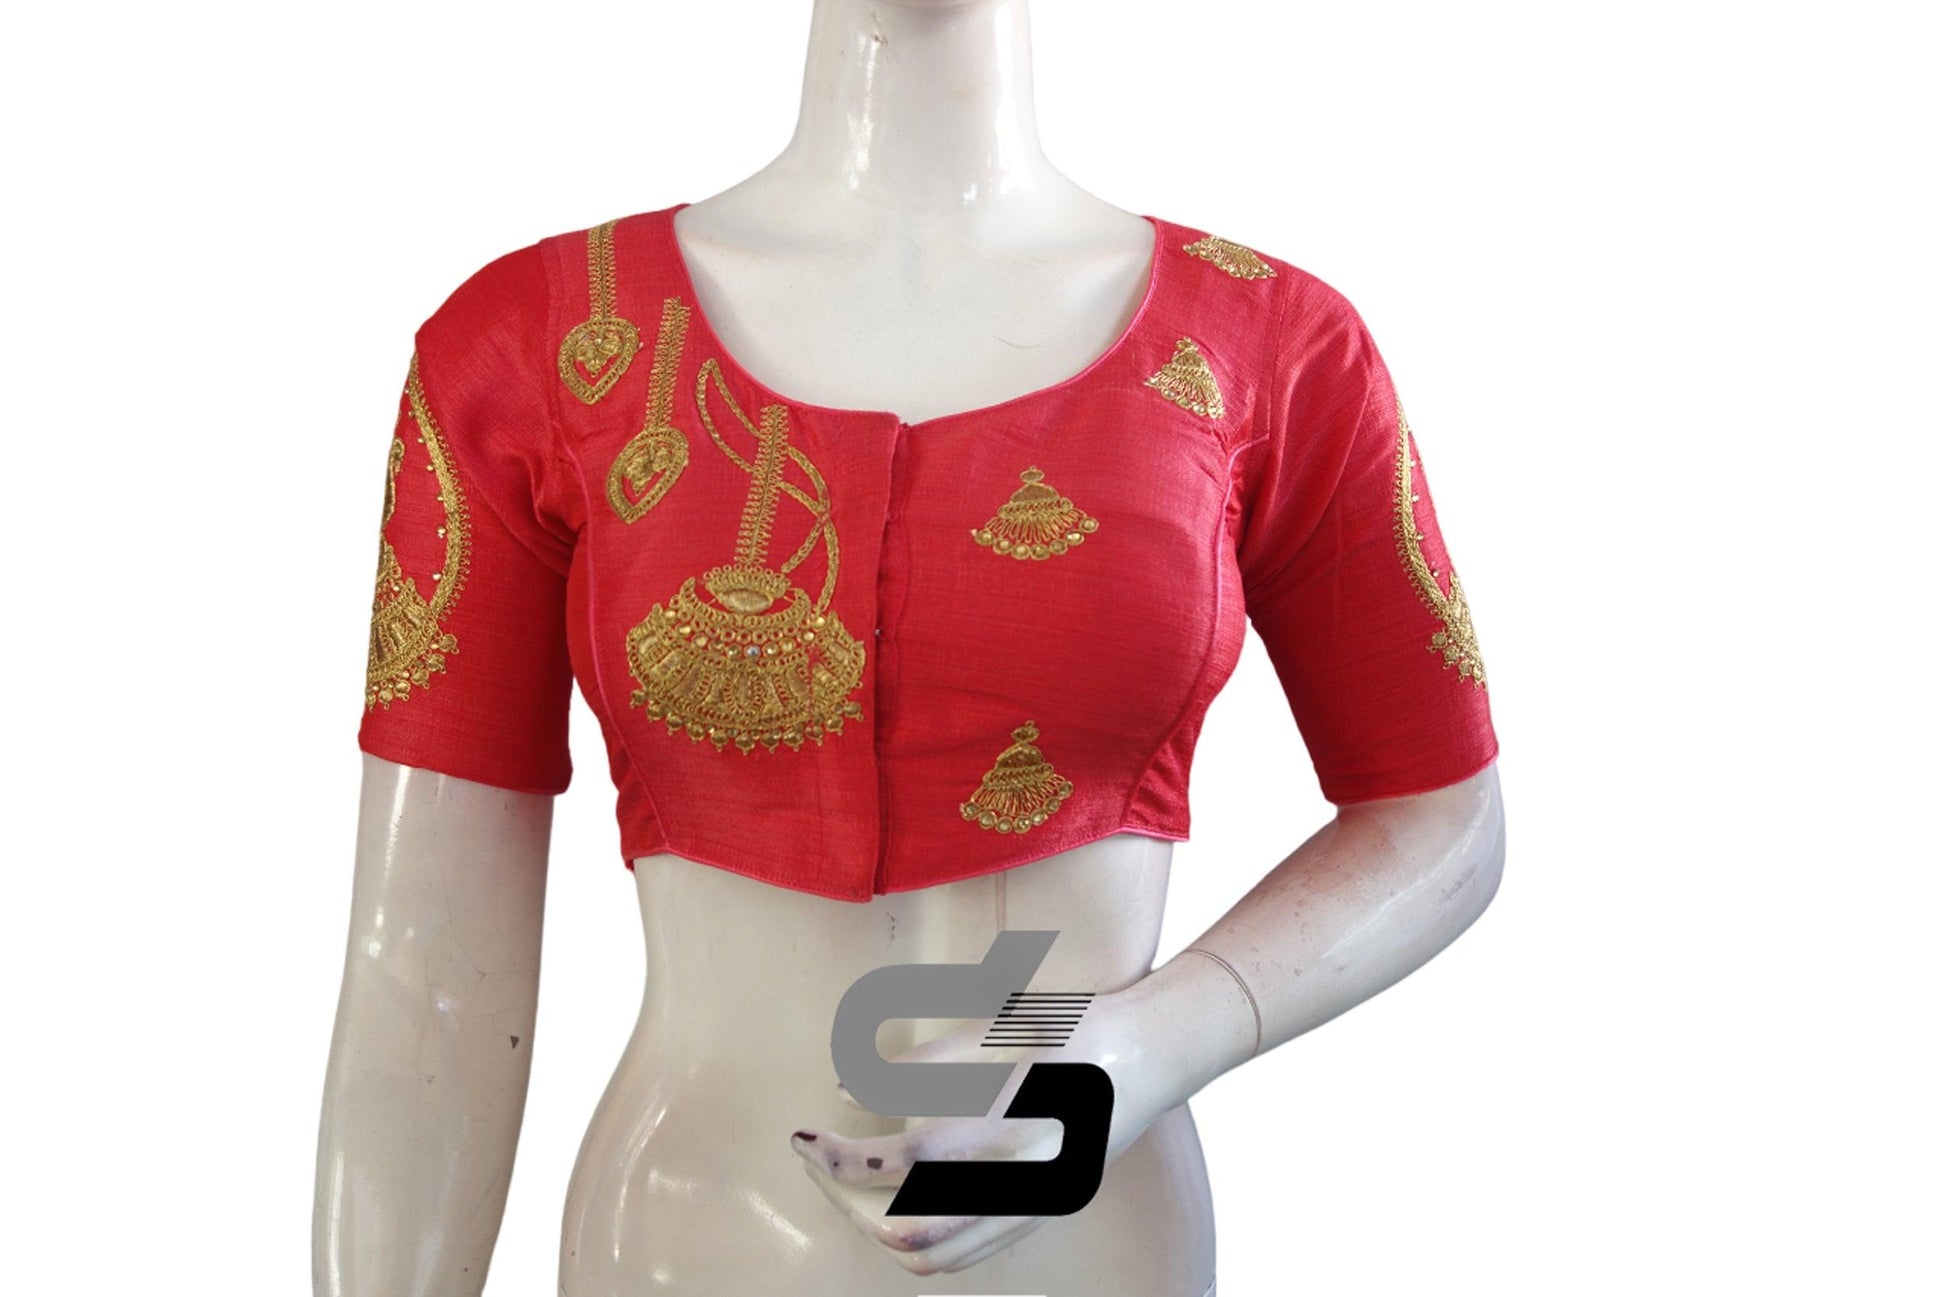 Peach Pink Color High Neck Designer Embroidery Readymade Saree Blouses,Inject a dose of lively shades. - D3blouses